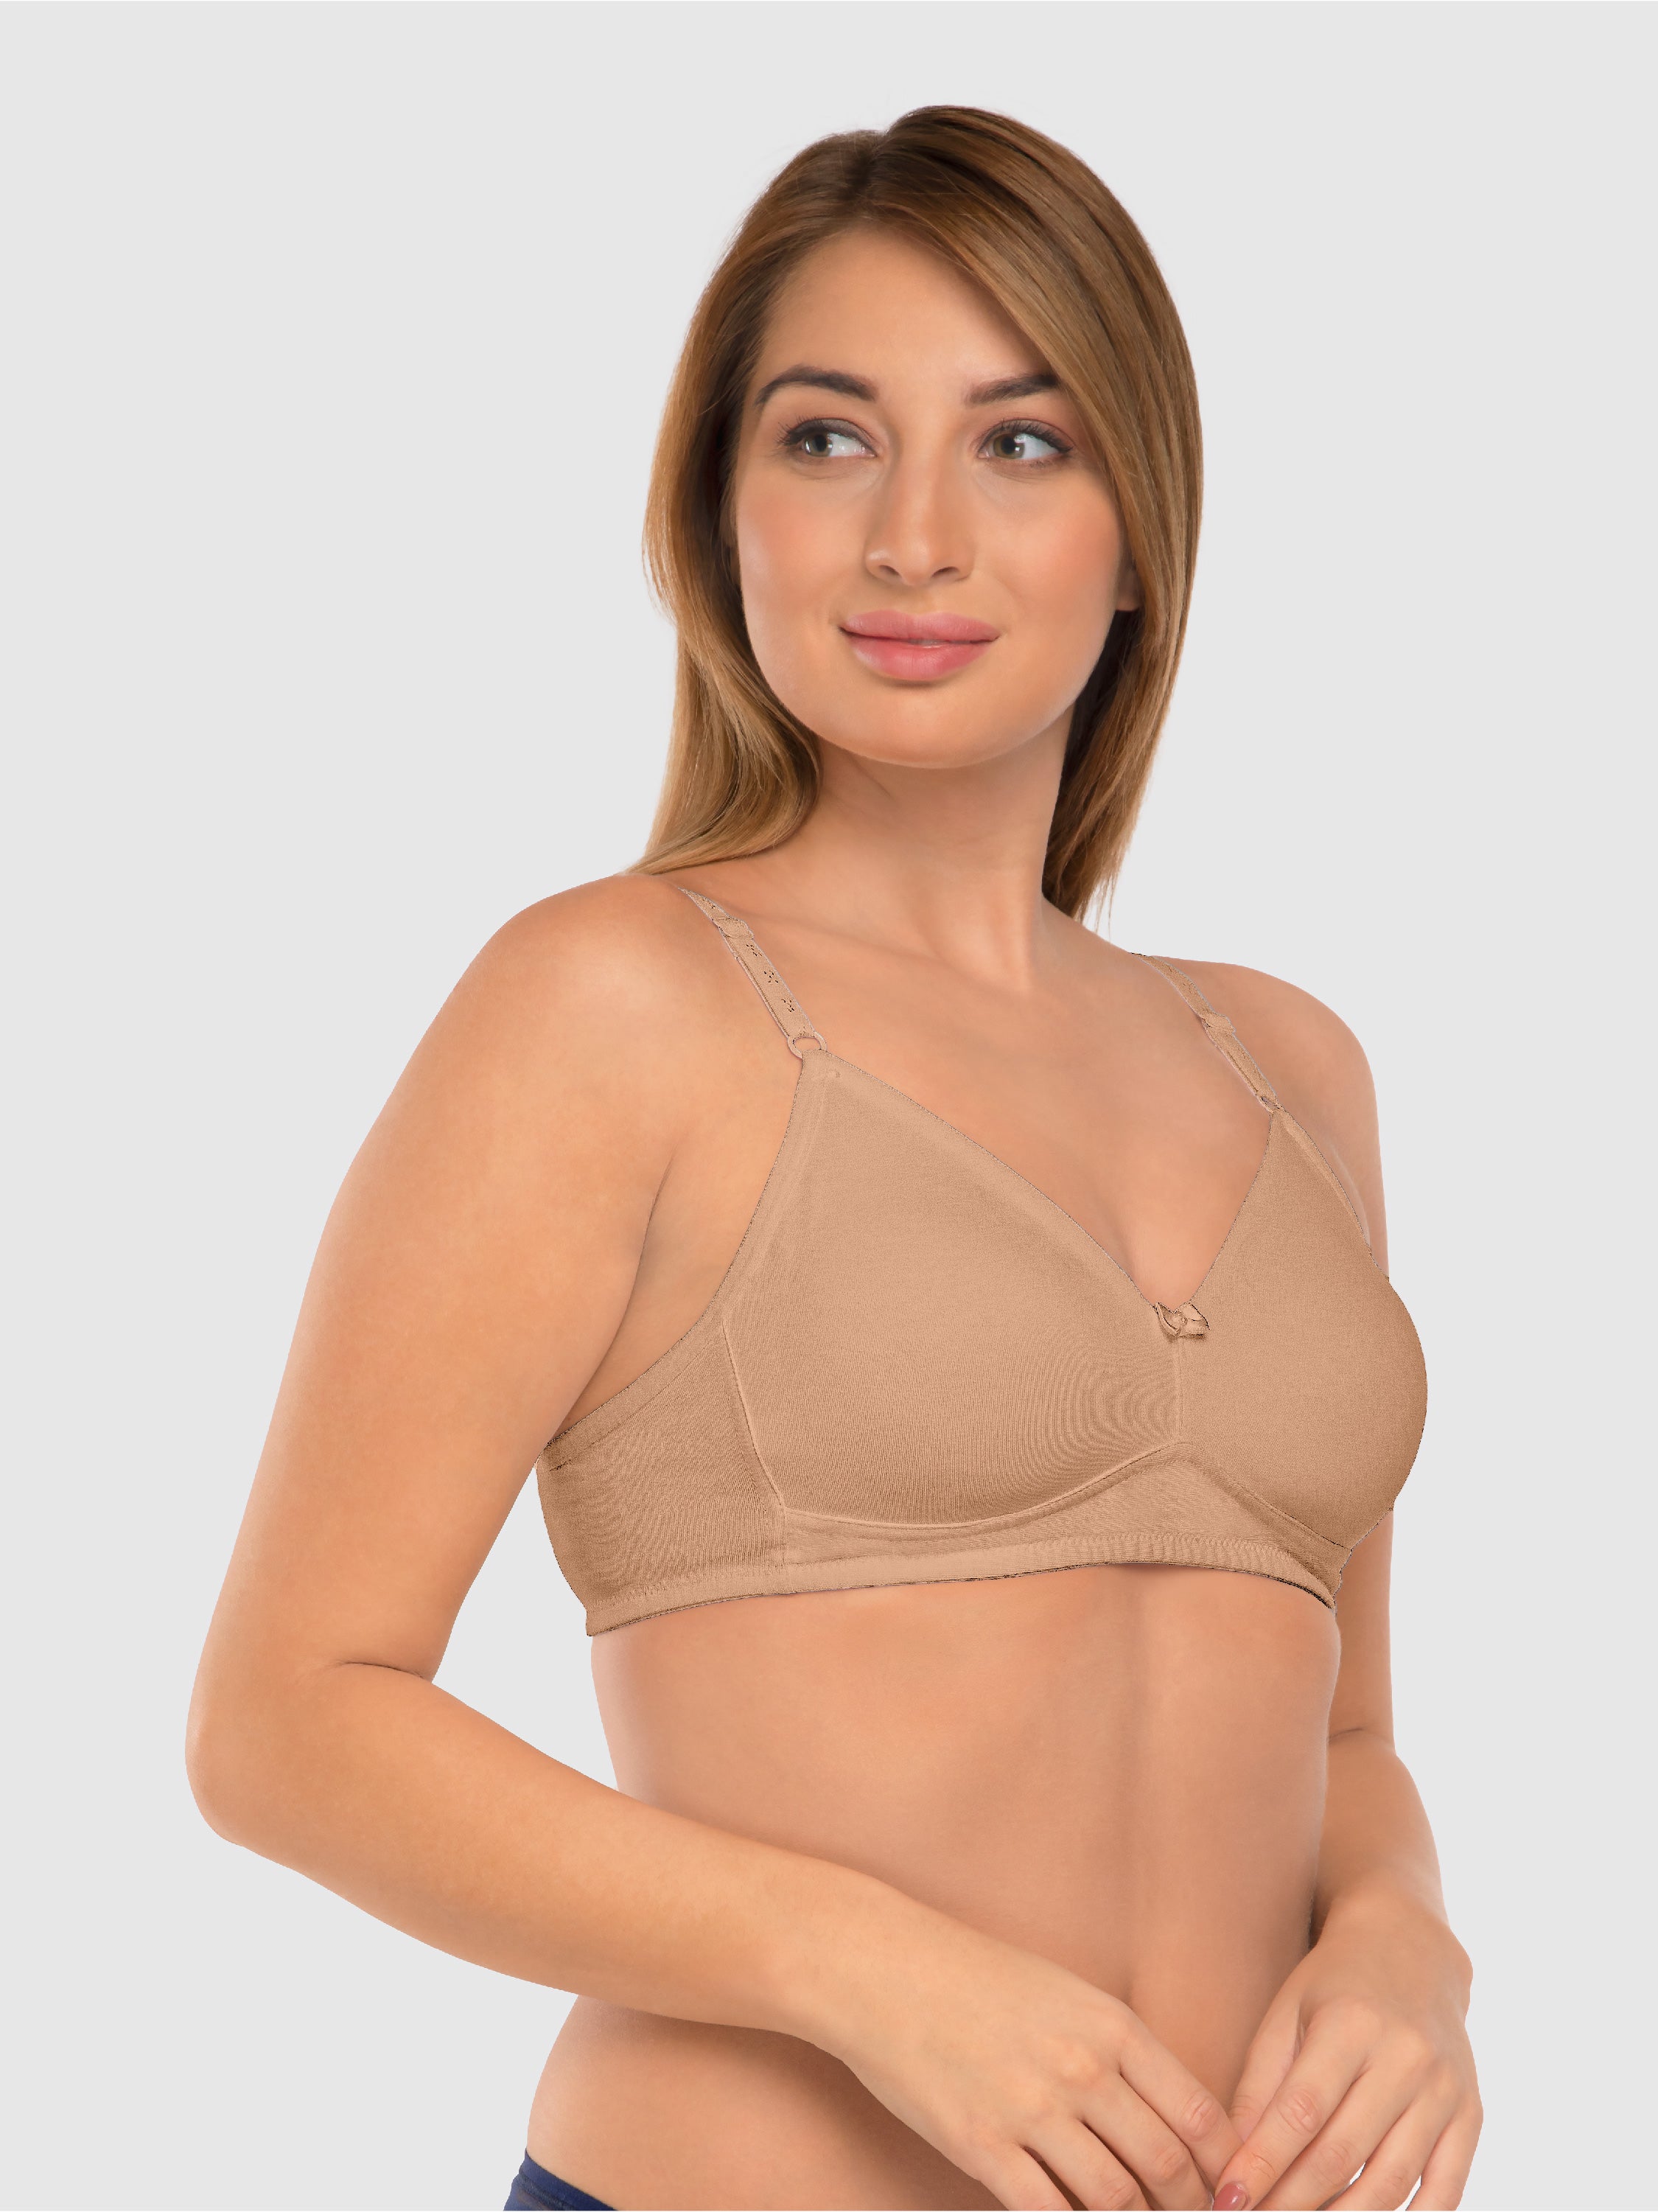 Daisy Dee Full Coverage Cherry Non Padded Saree Blouse Bra (Peach ) in  Bangalore at best price by Lovable Lingerie Pvt Ltd - Justdial